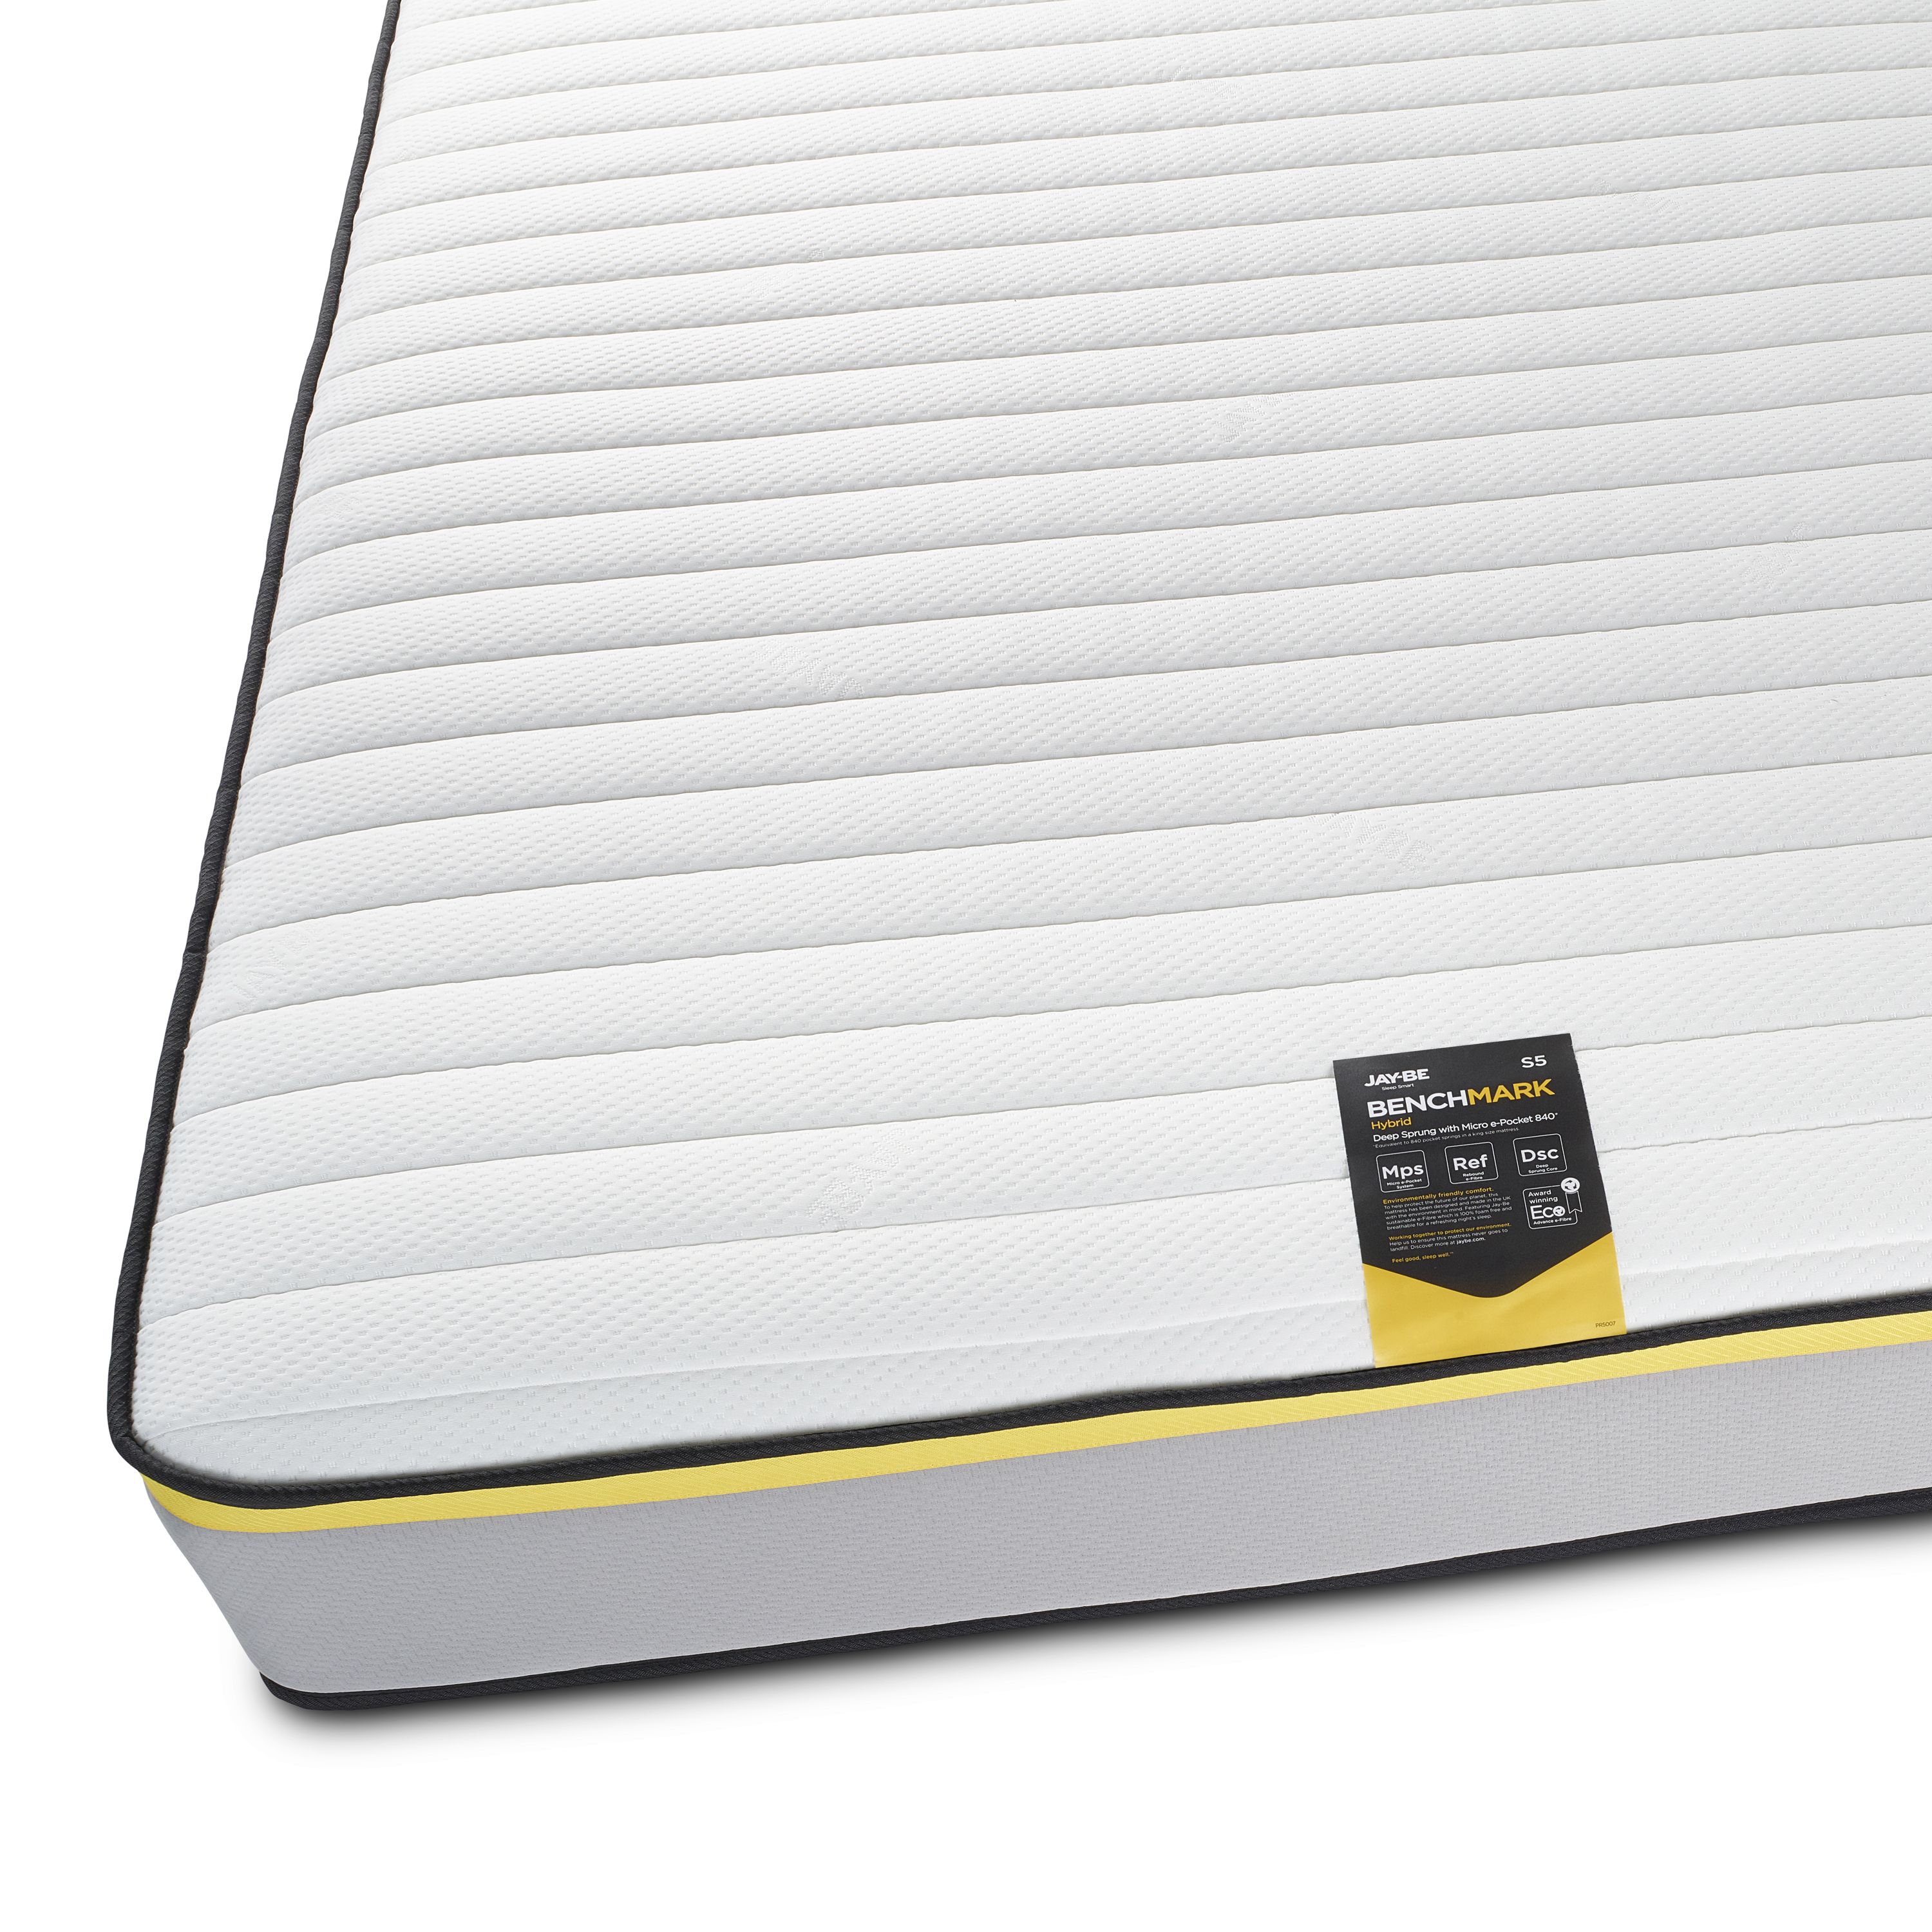 Jay-Be Benchmark S5 Hybrid Eco Friendly Open coil Water resistant Double Mattress